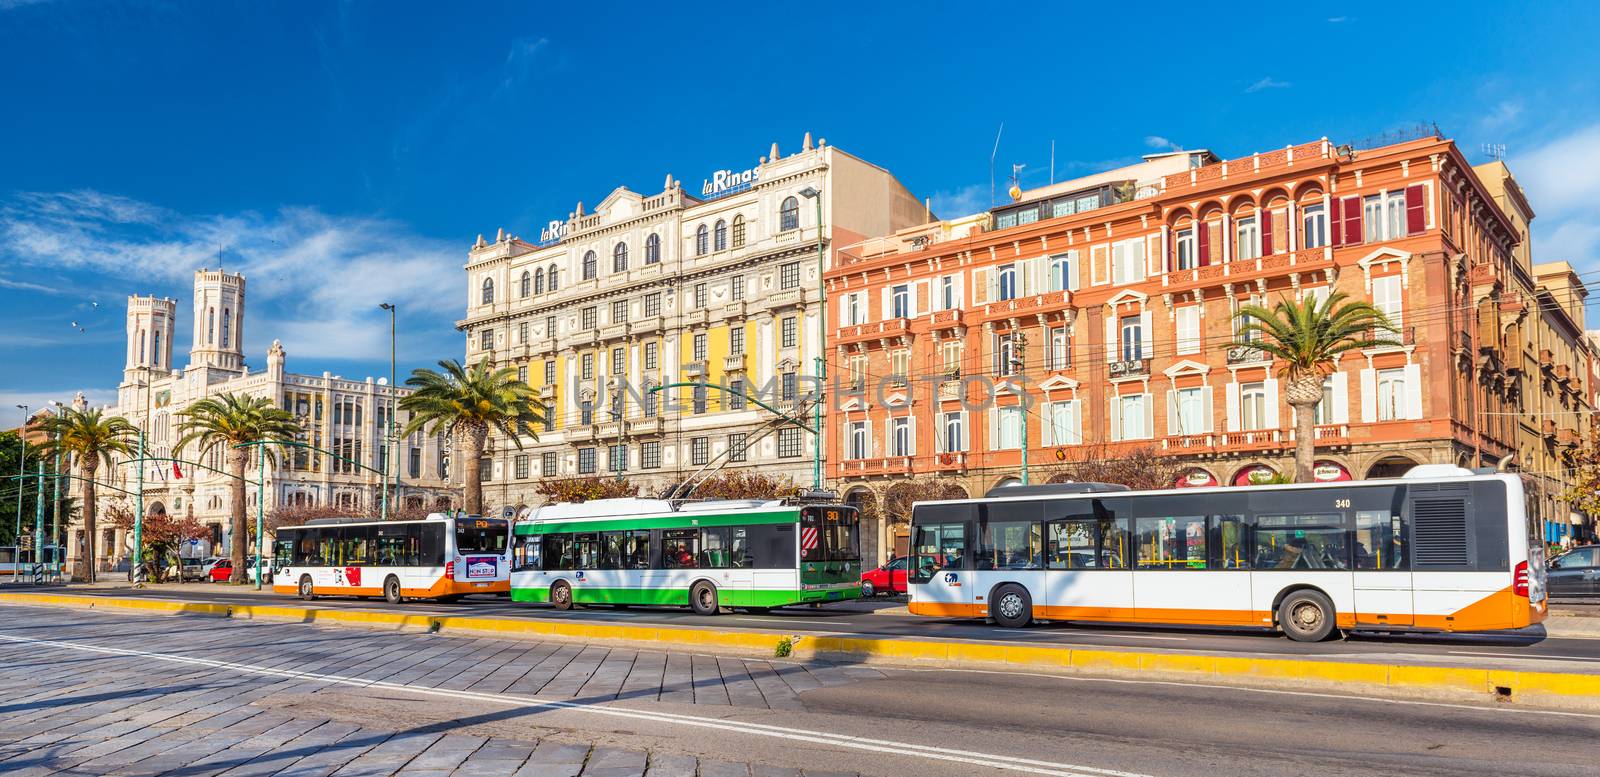 Cagliari, Sardinia - January 2016, Italy: Beautiful colorful buildings on Cagliari seafront, buses and trolley car parked near bus stop on the central street of the city